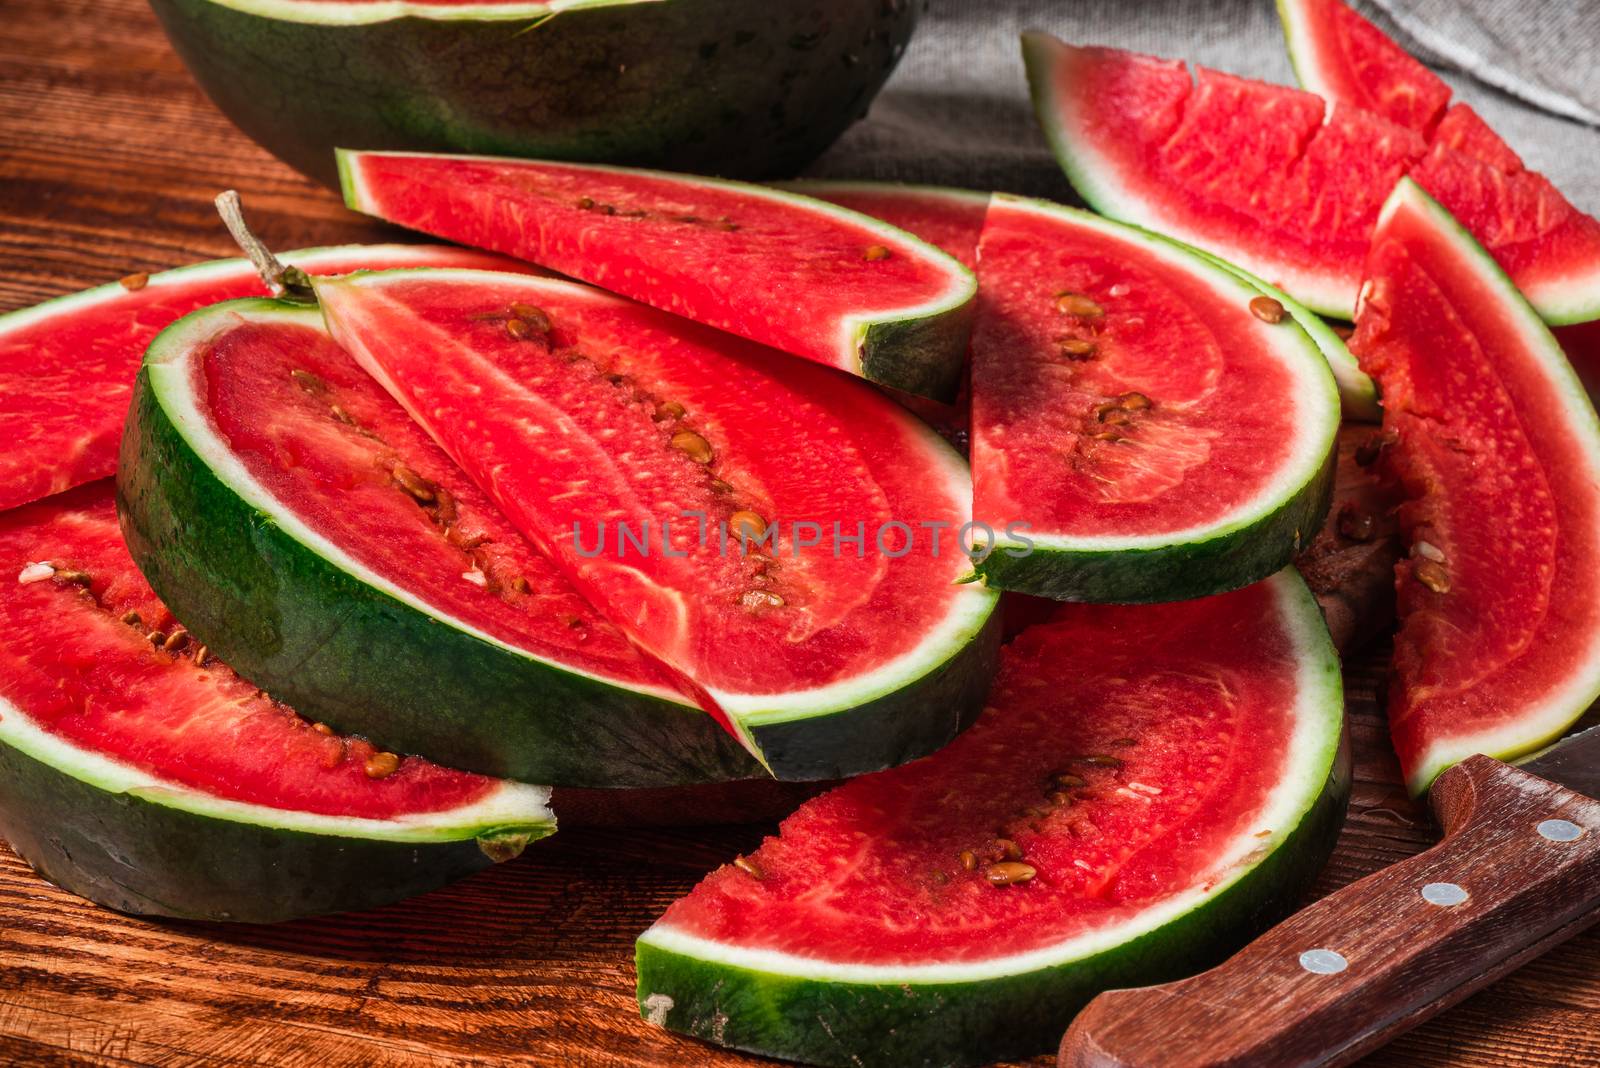 Watermelon slices lying on wooden table. Summer juicy dessert.